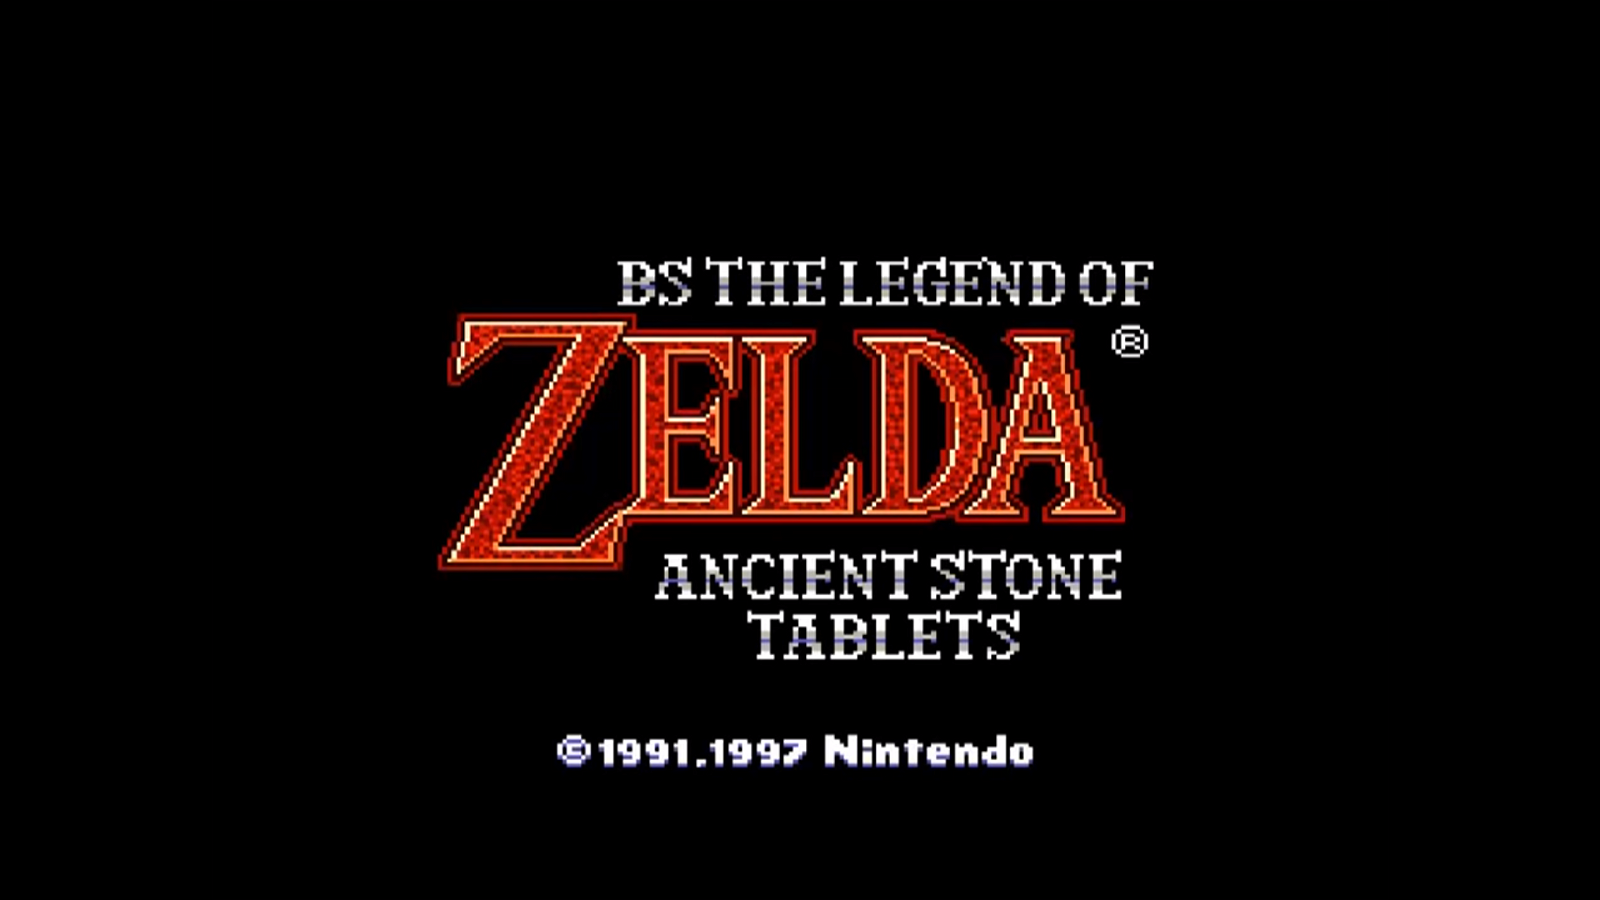 Image of BS The Legend of Zelda: Ancient Stone Tablets